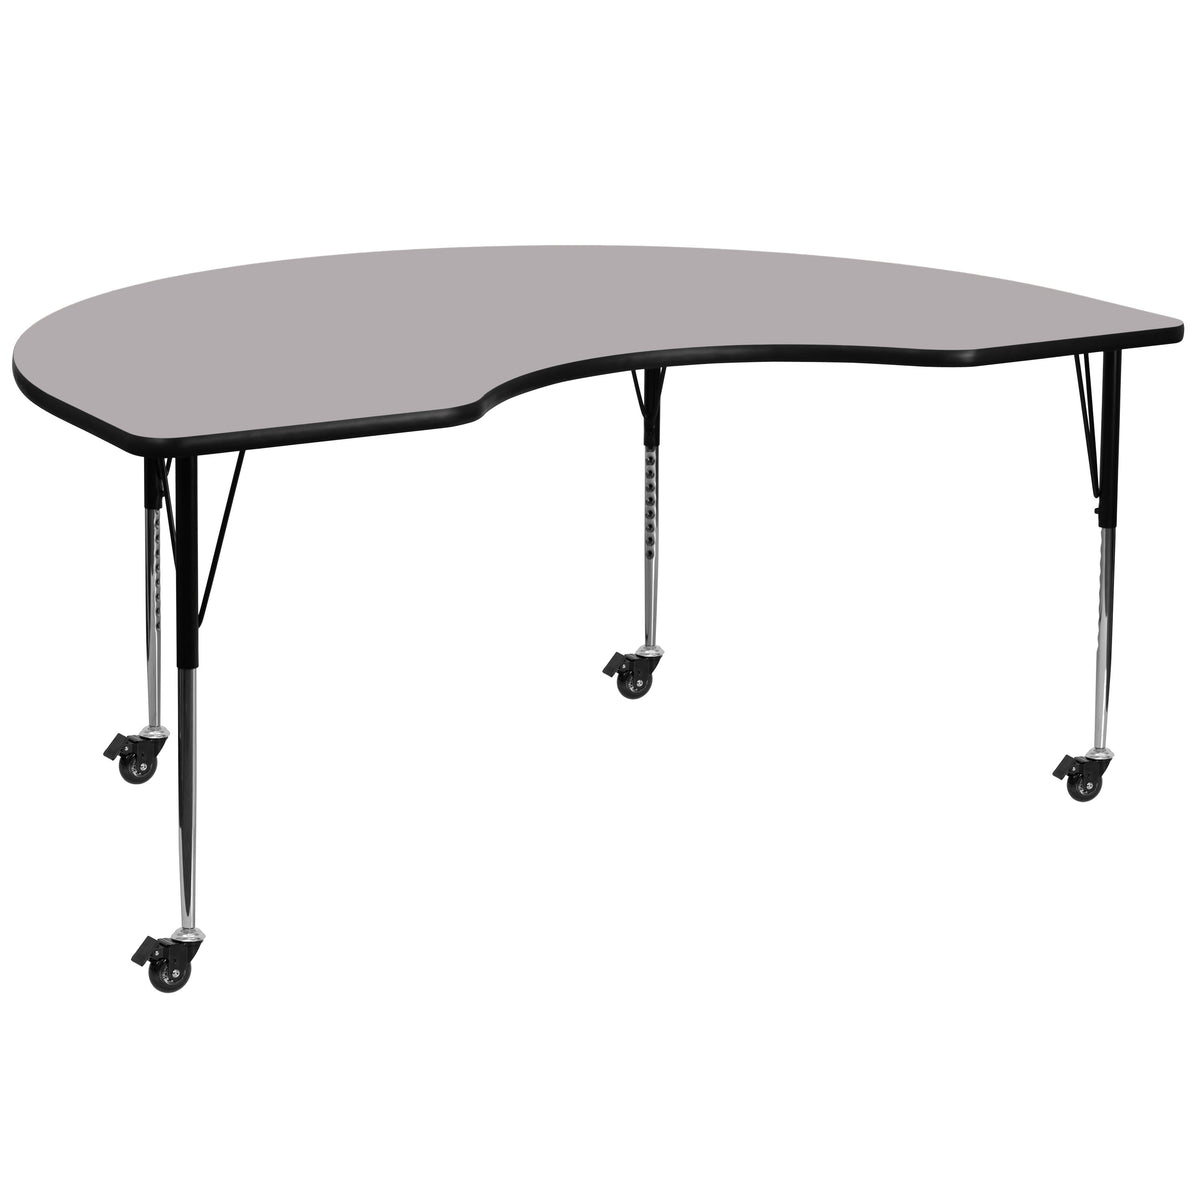 Gray |#| Mobile 48inchW x 72inchL Kidney Grey Thermal Laminate Adjustable Activity Table